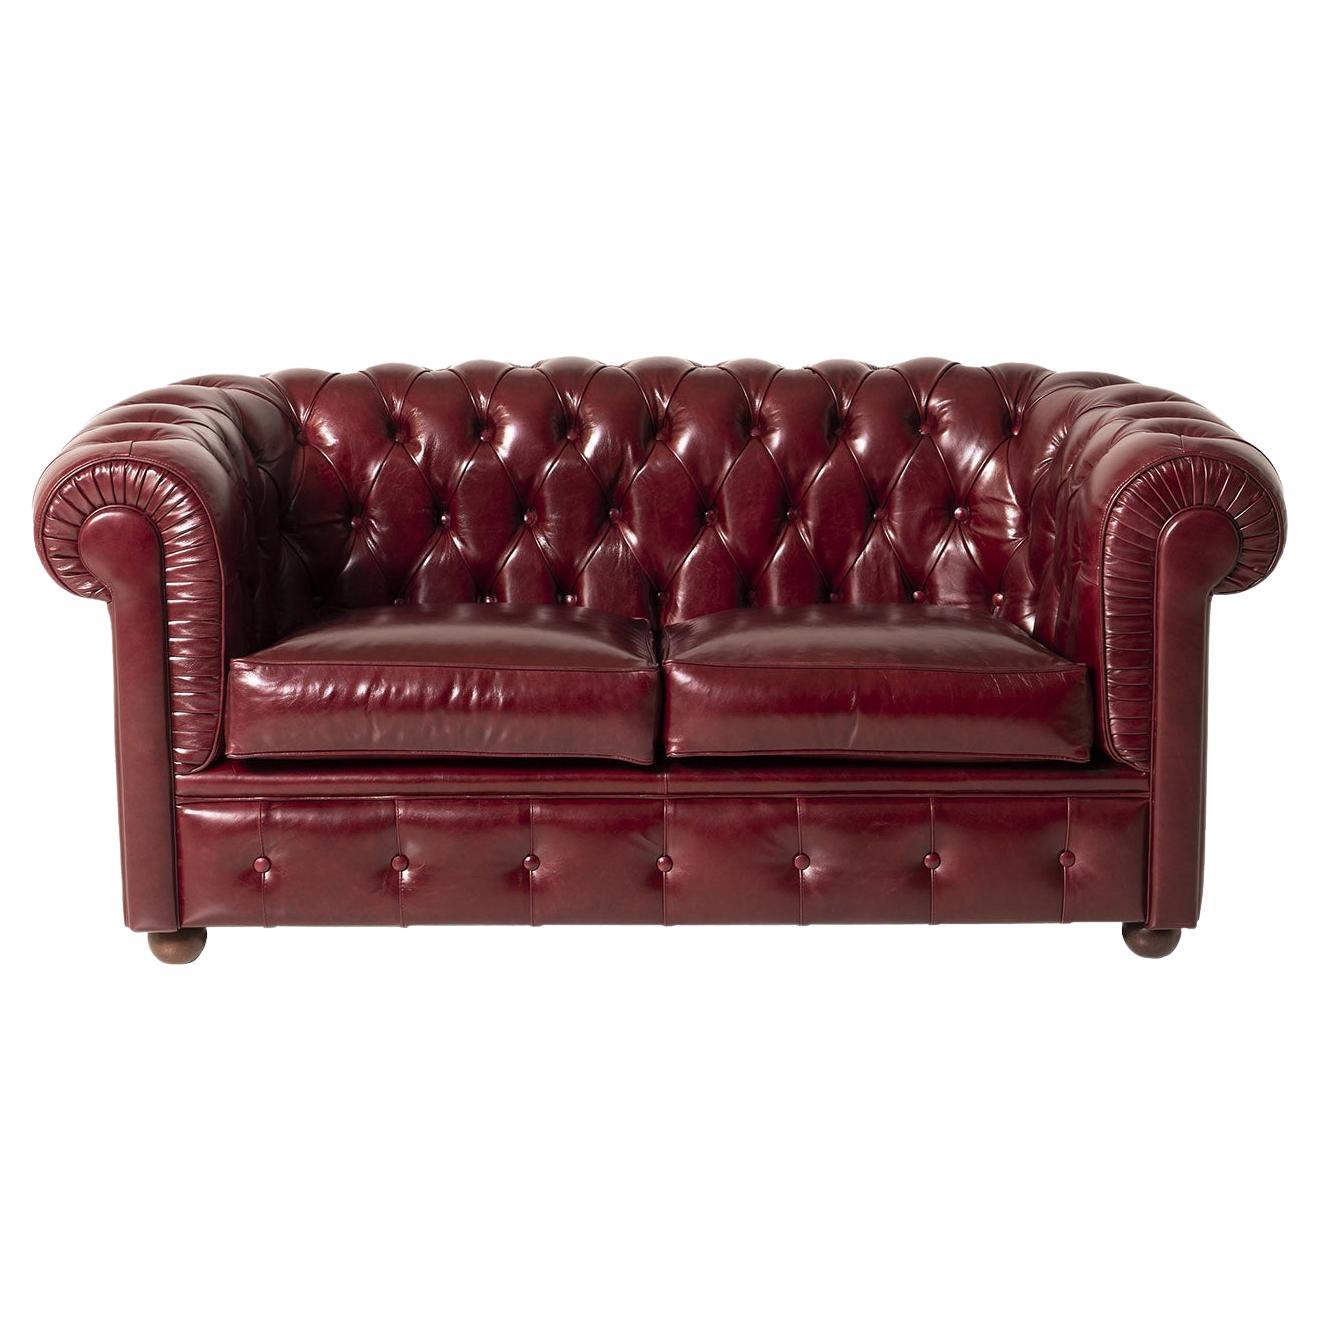 Chesterfield Bordeaux Leather Sofa